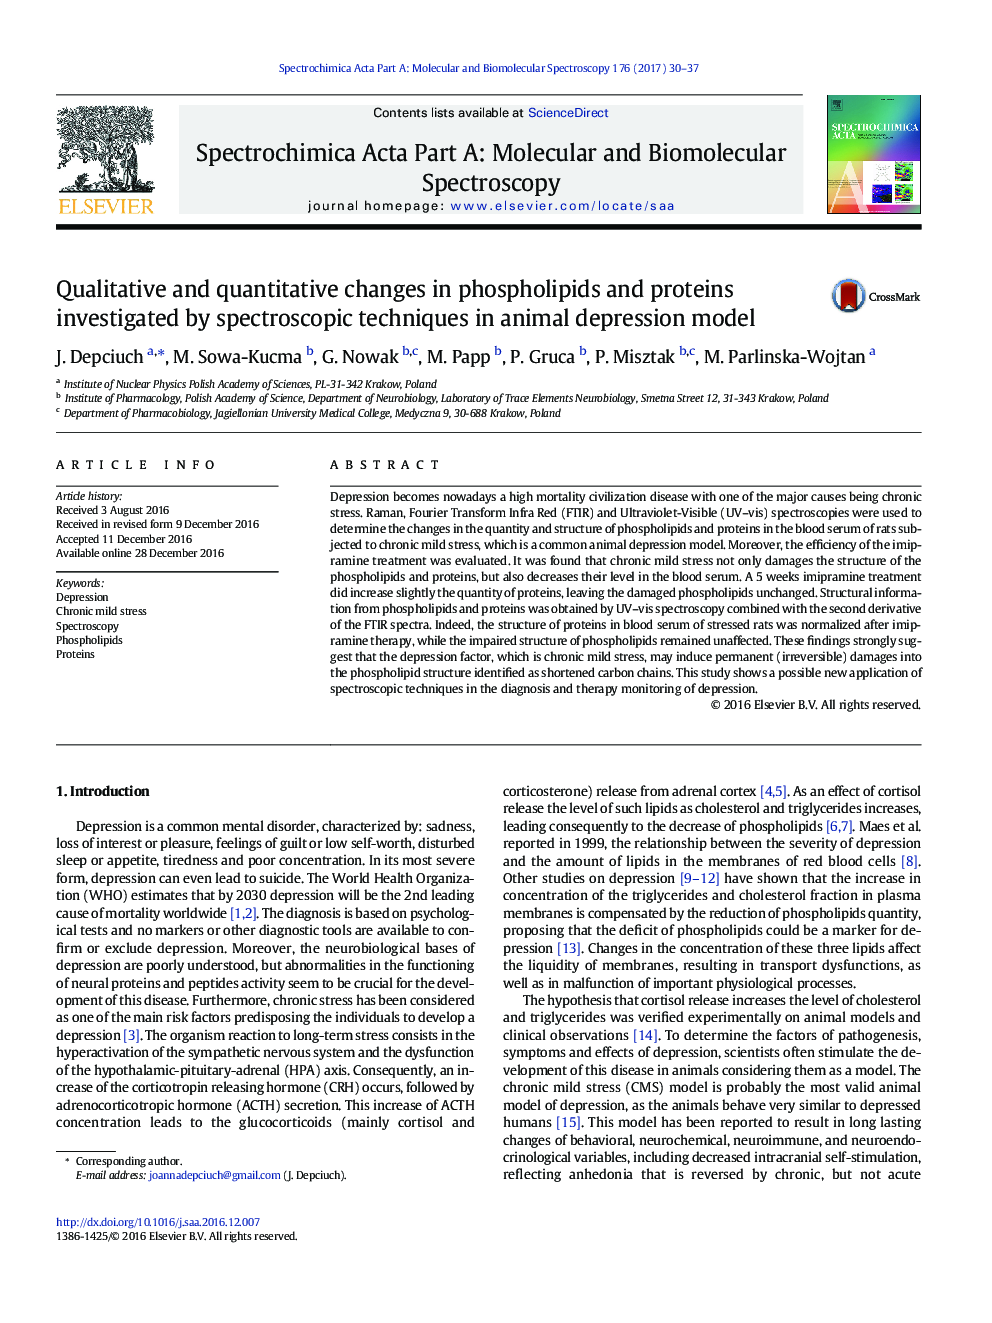 Qualitative and quantitative changes in phospholipids and proteins investigated by spectroscopic techniques in animal depression model